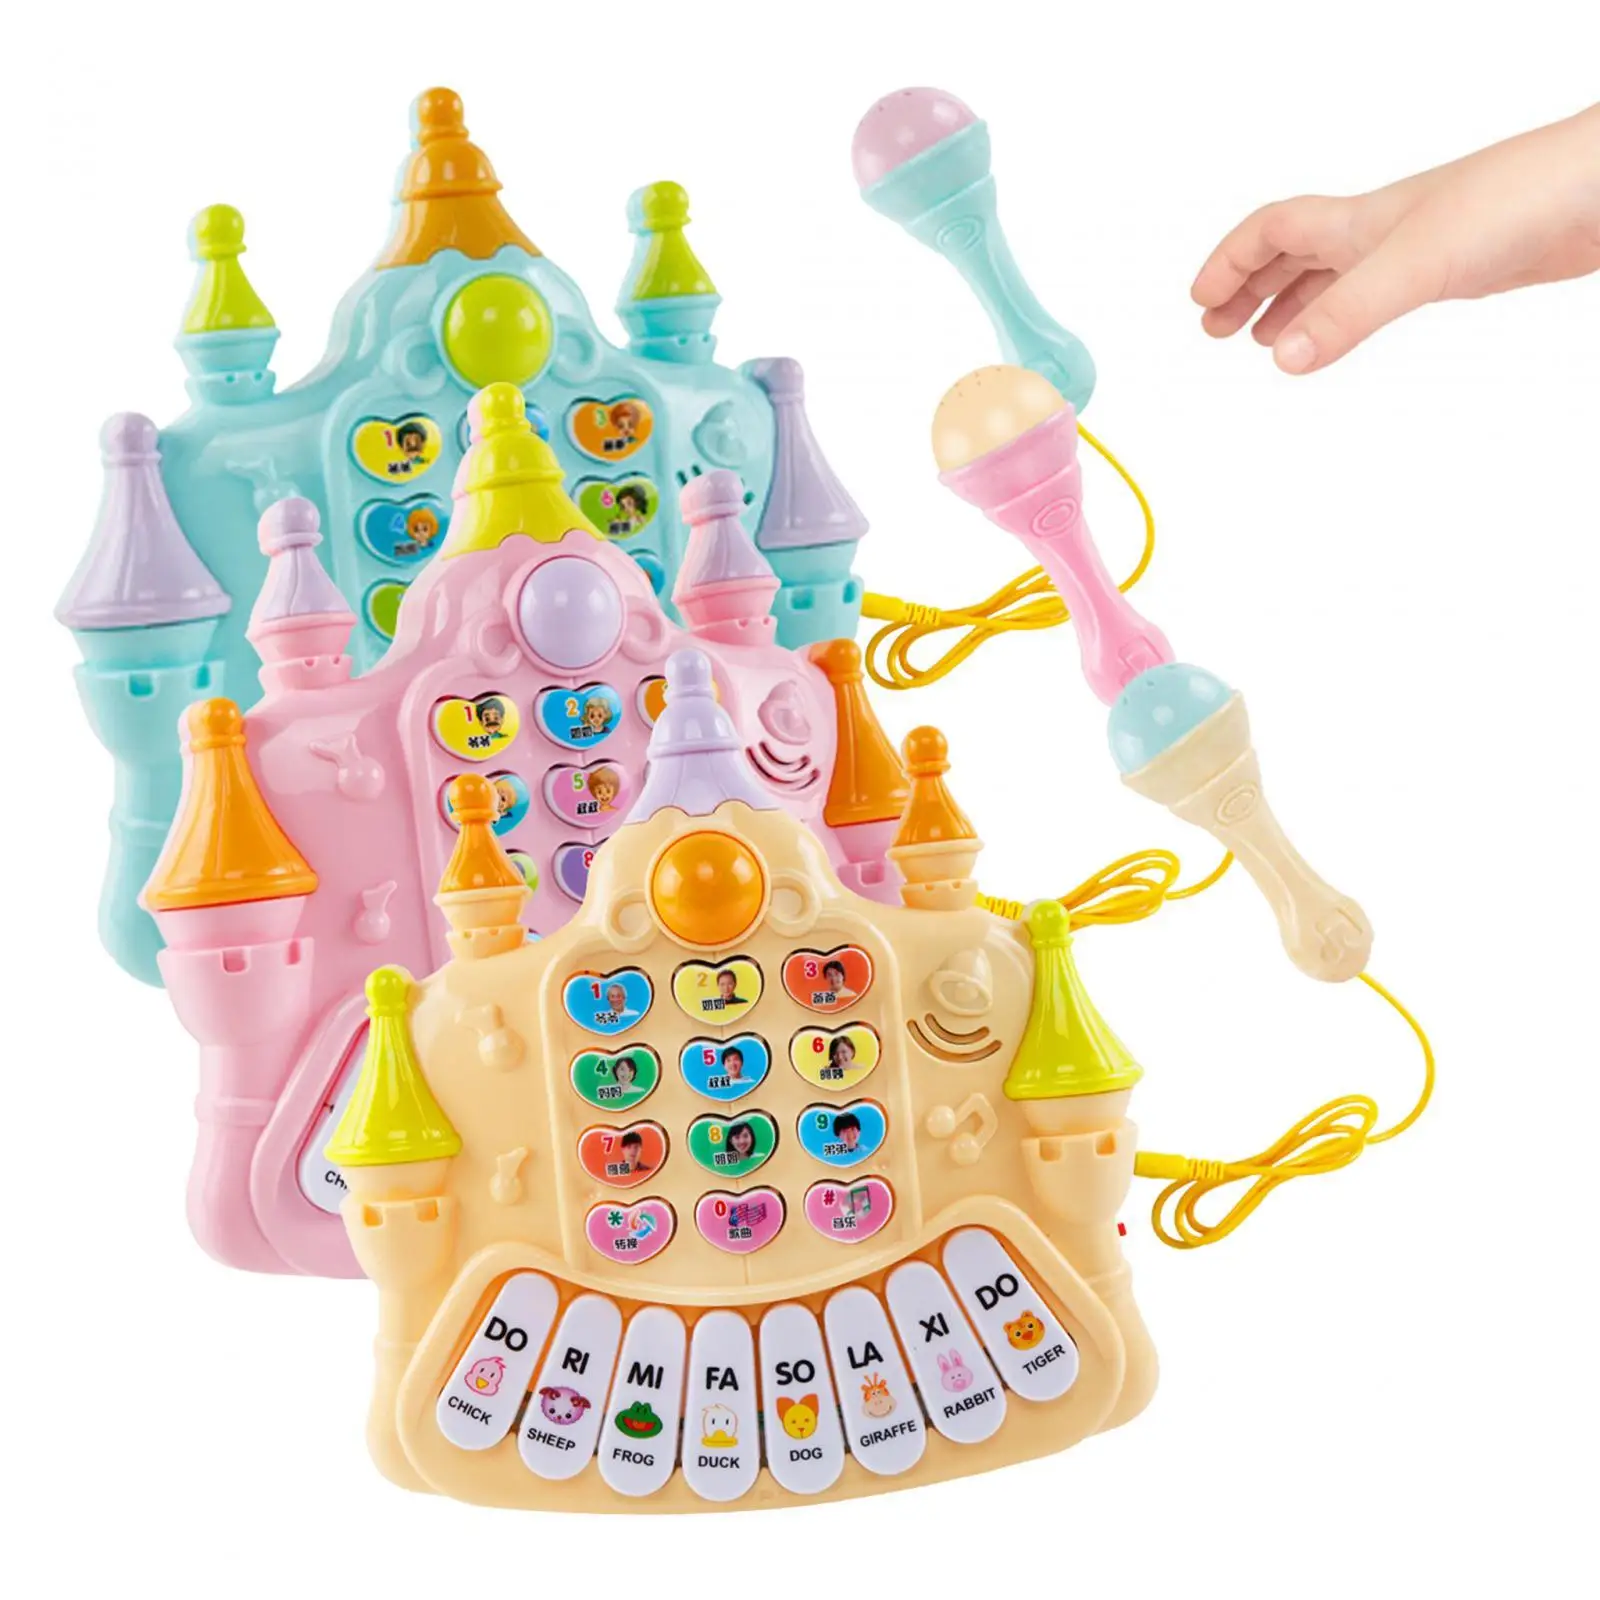 Musical Piano Toy Musical Toy 8 Key Early Educational Toy Musical Instruments Toys for Boys Girls Infants Kids Birthday Gifts